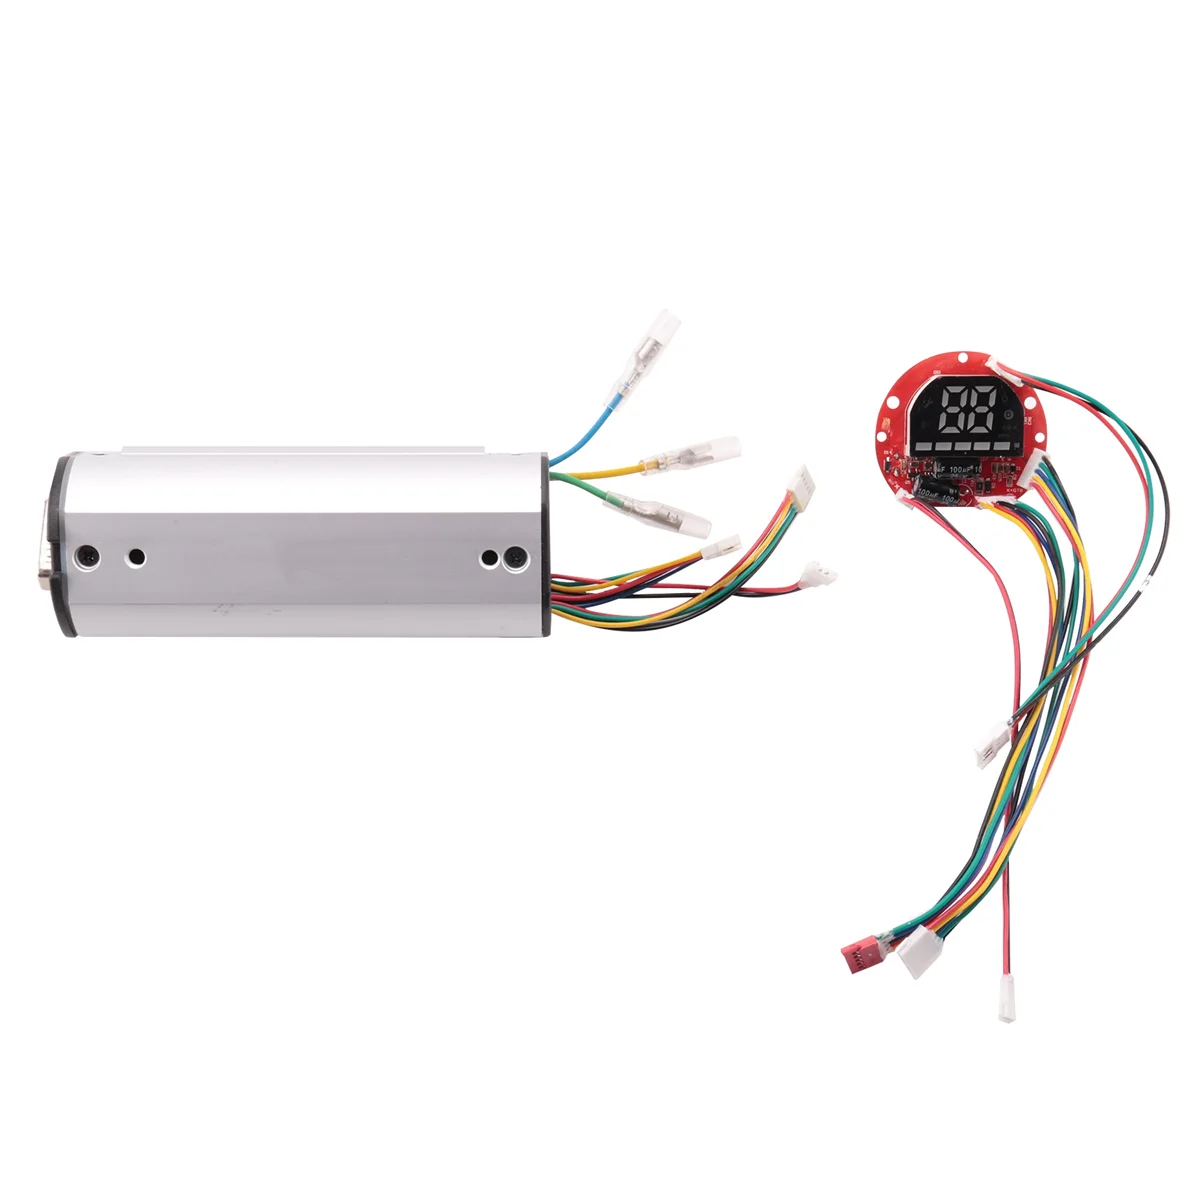 

36V 20A Electric Scooter Motor Controller Dashboard Panel E Scooter Speed Controller for HX X7 Motor Module